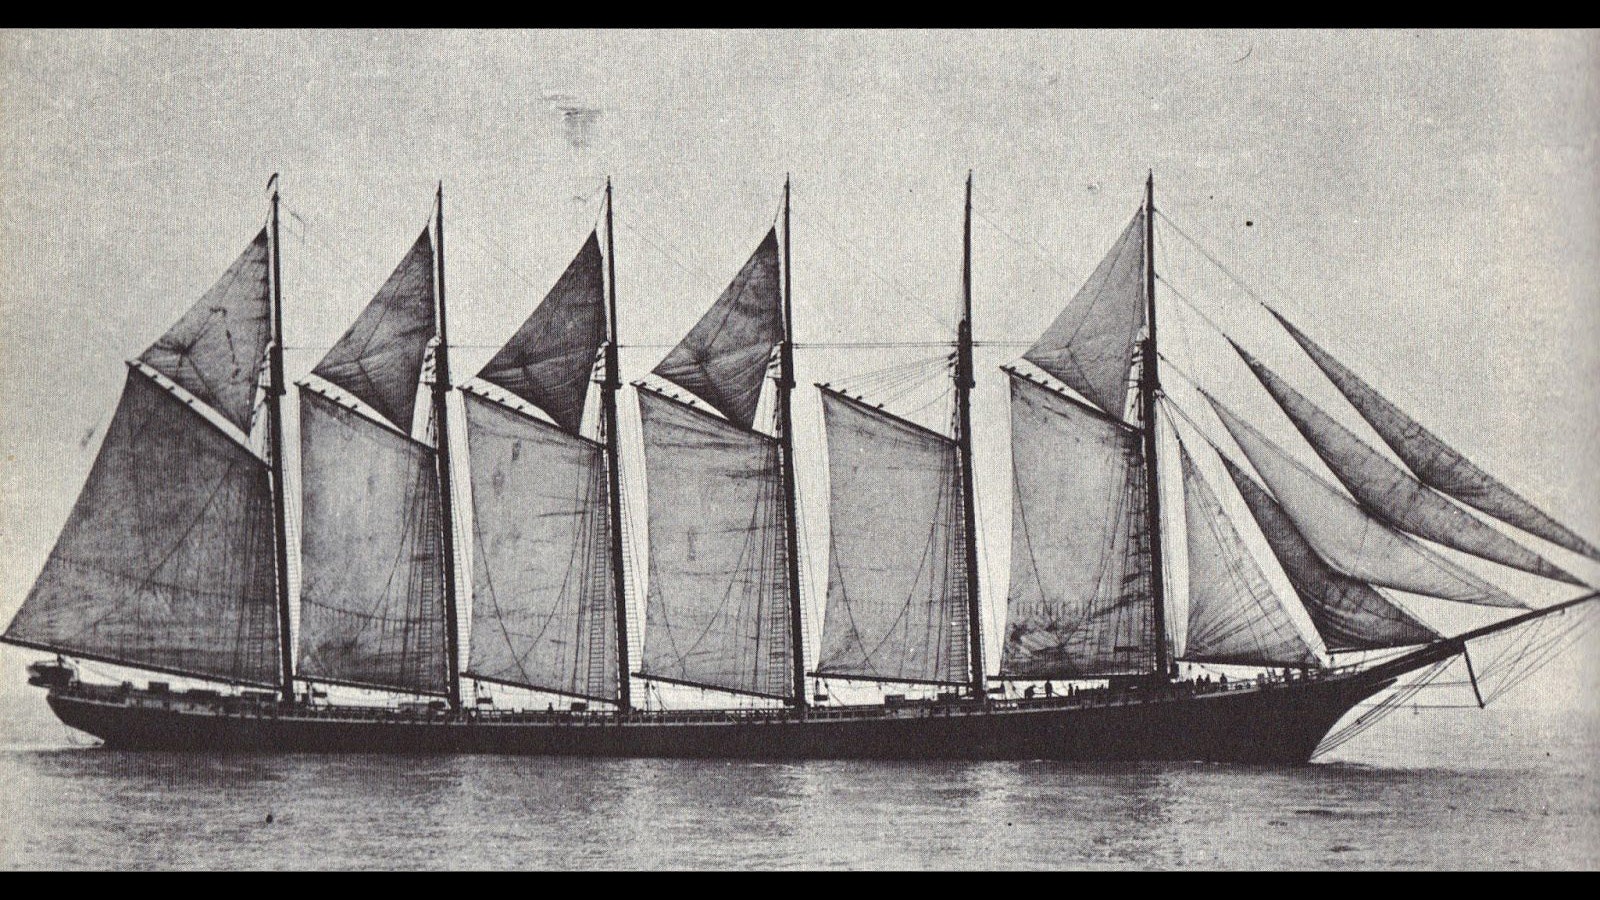 The Wyoming with all sails fully unfurled.